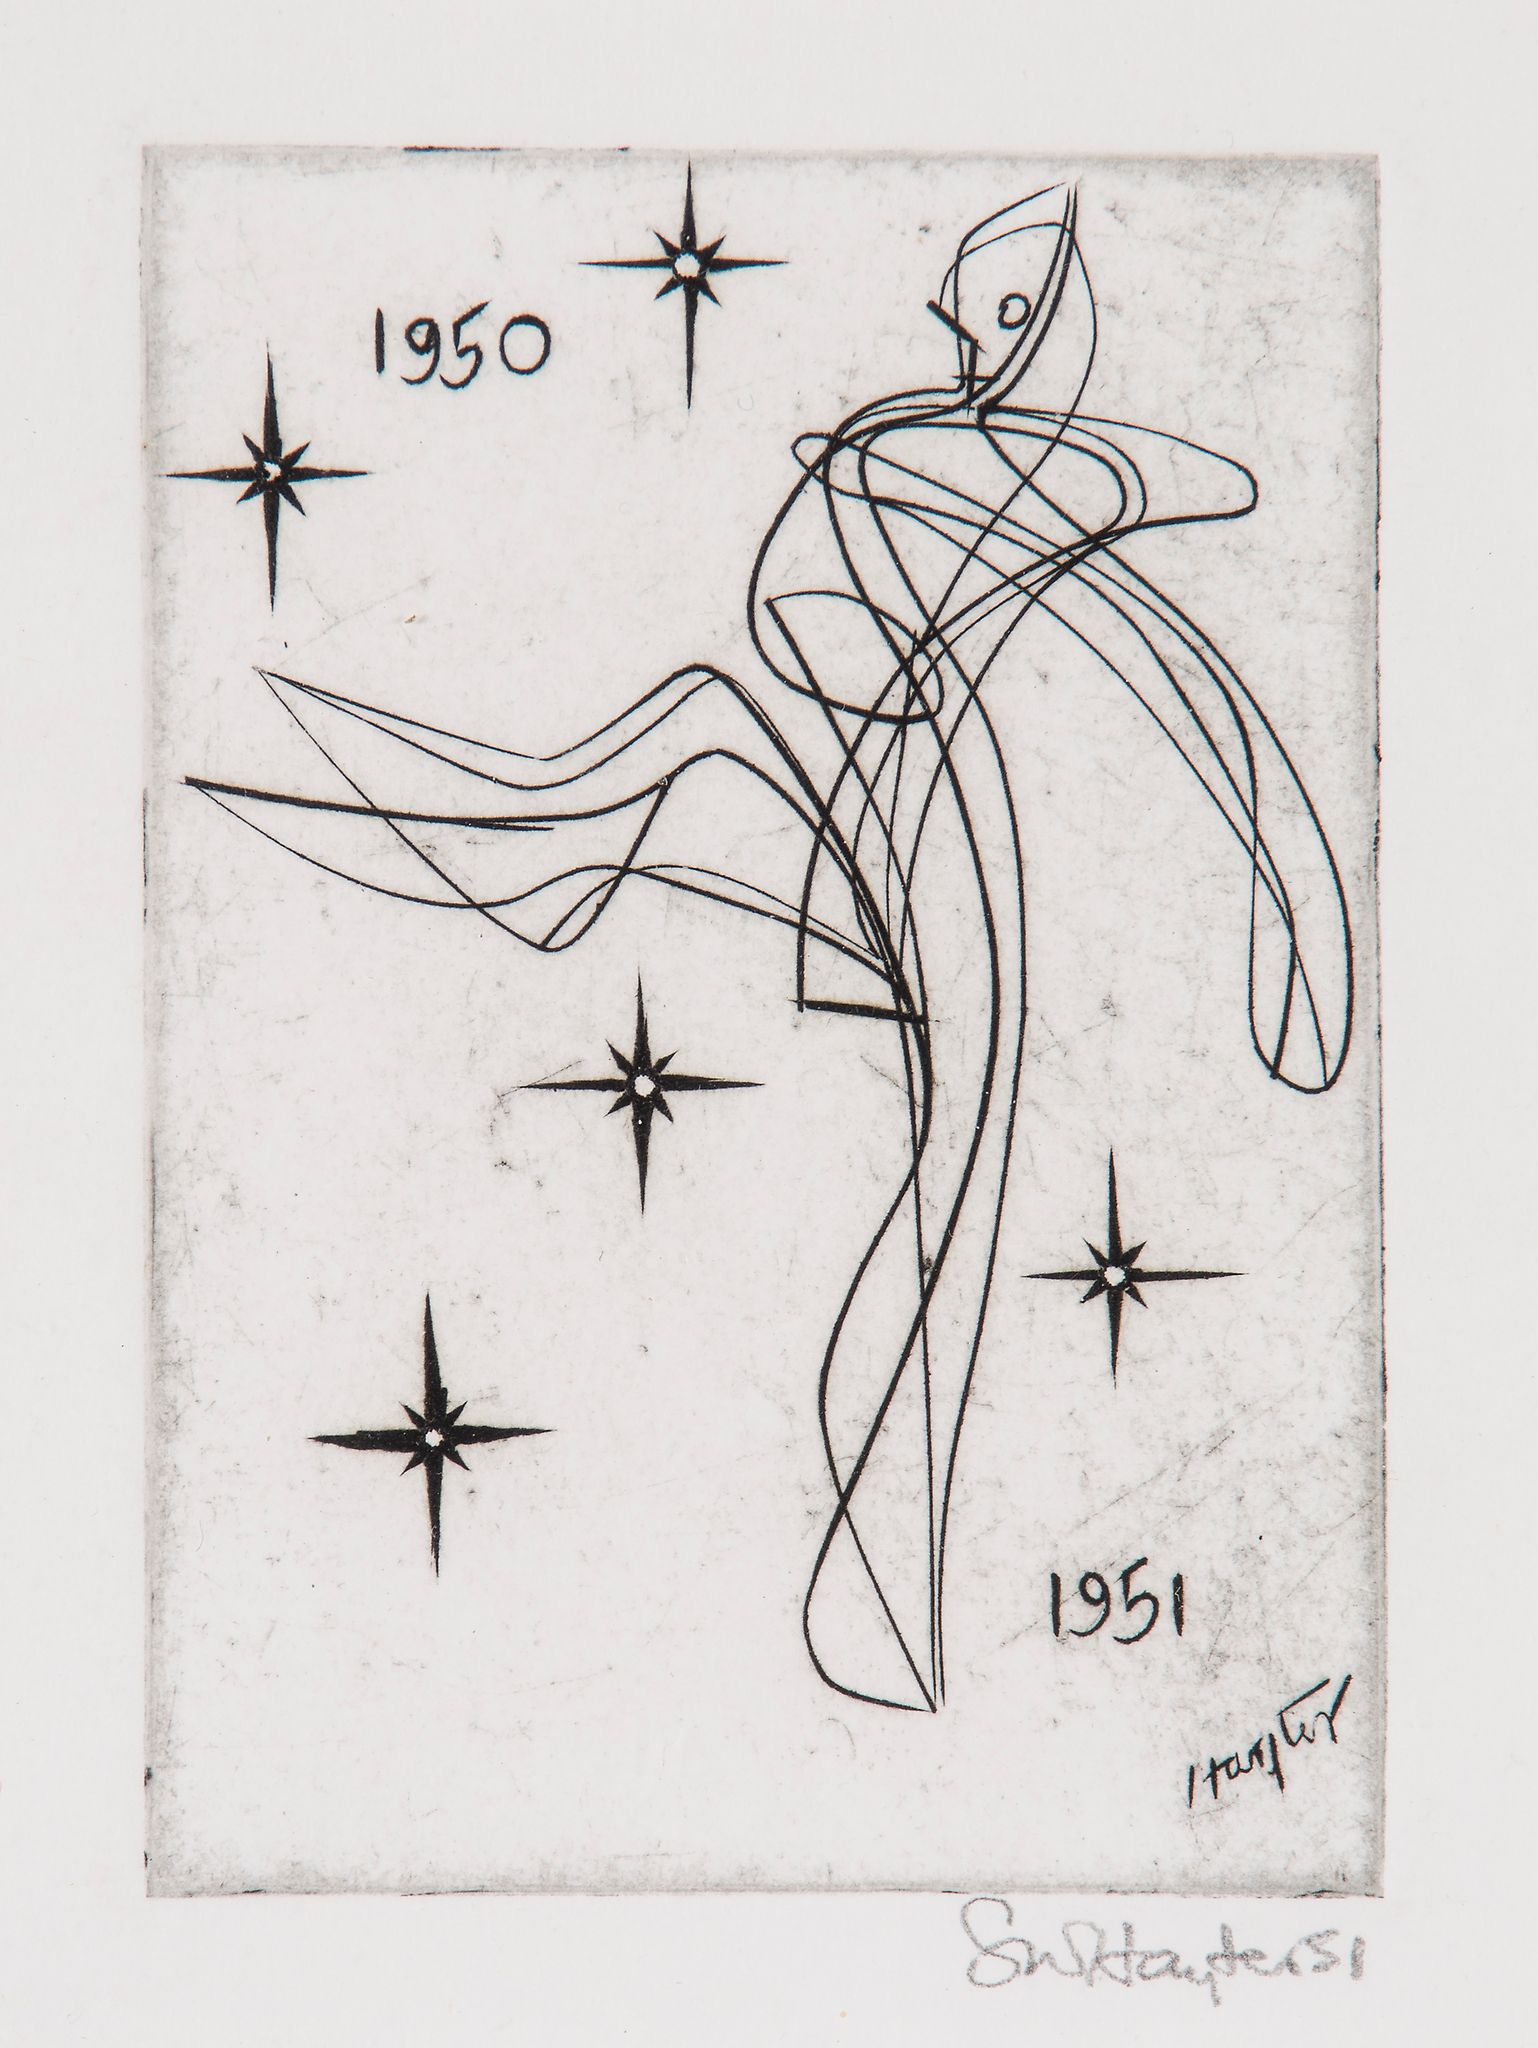 Stanley William Hayter (1901-1988) - Greeting card for 1950-51 (B. ) the engraving, 1951, signed and